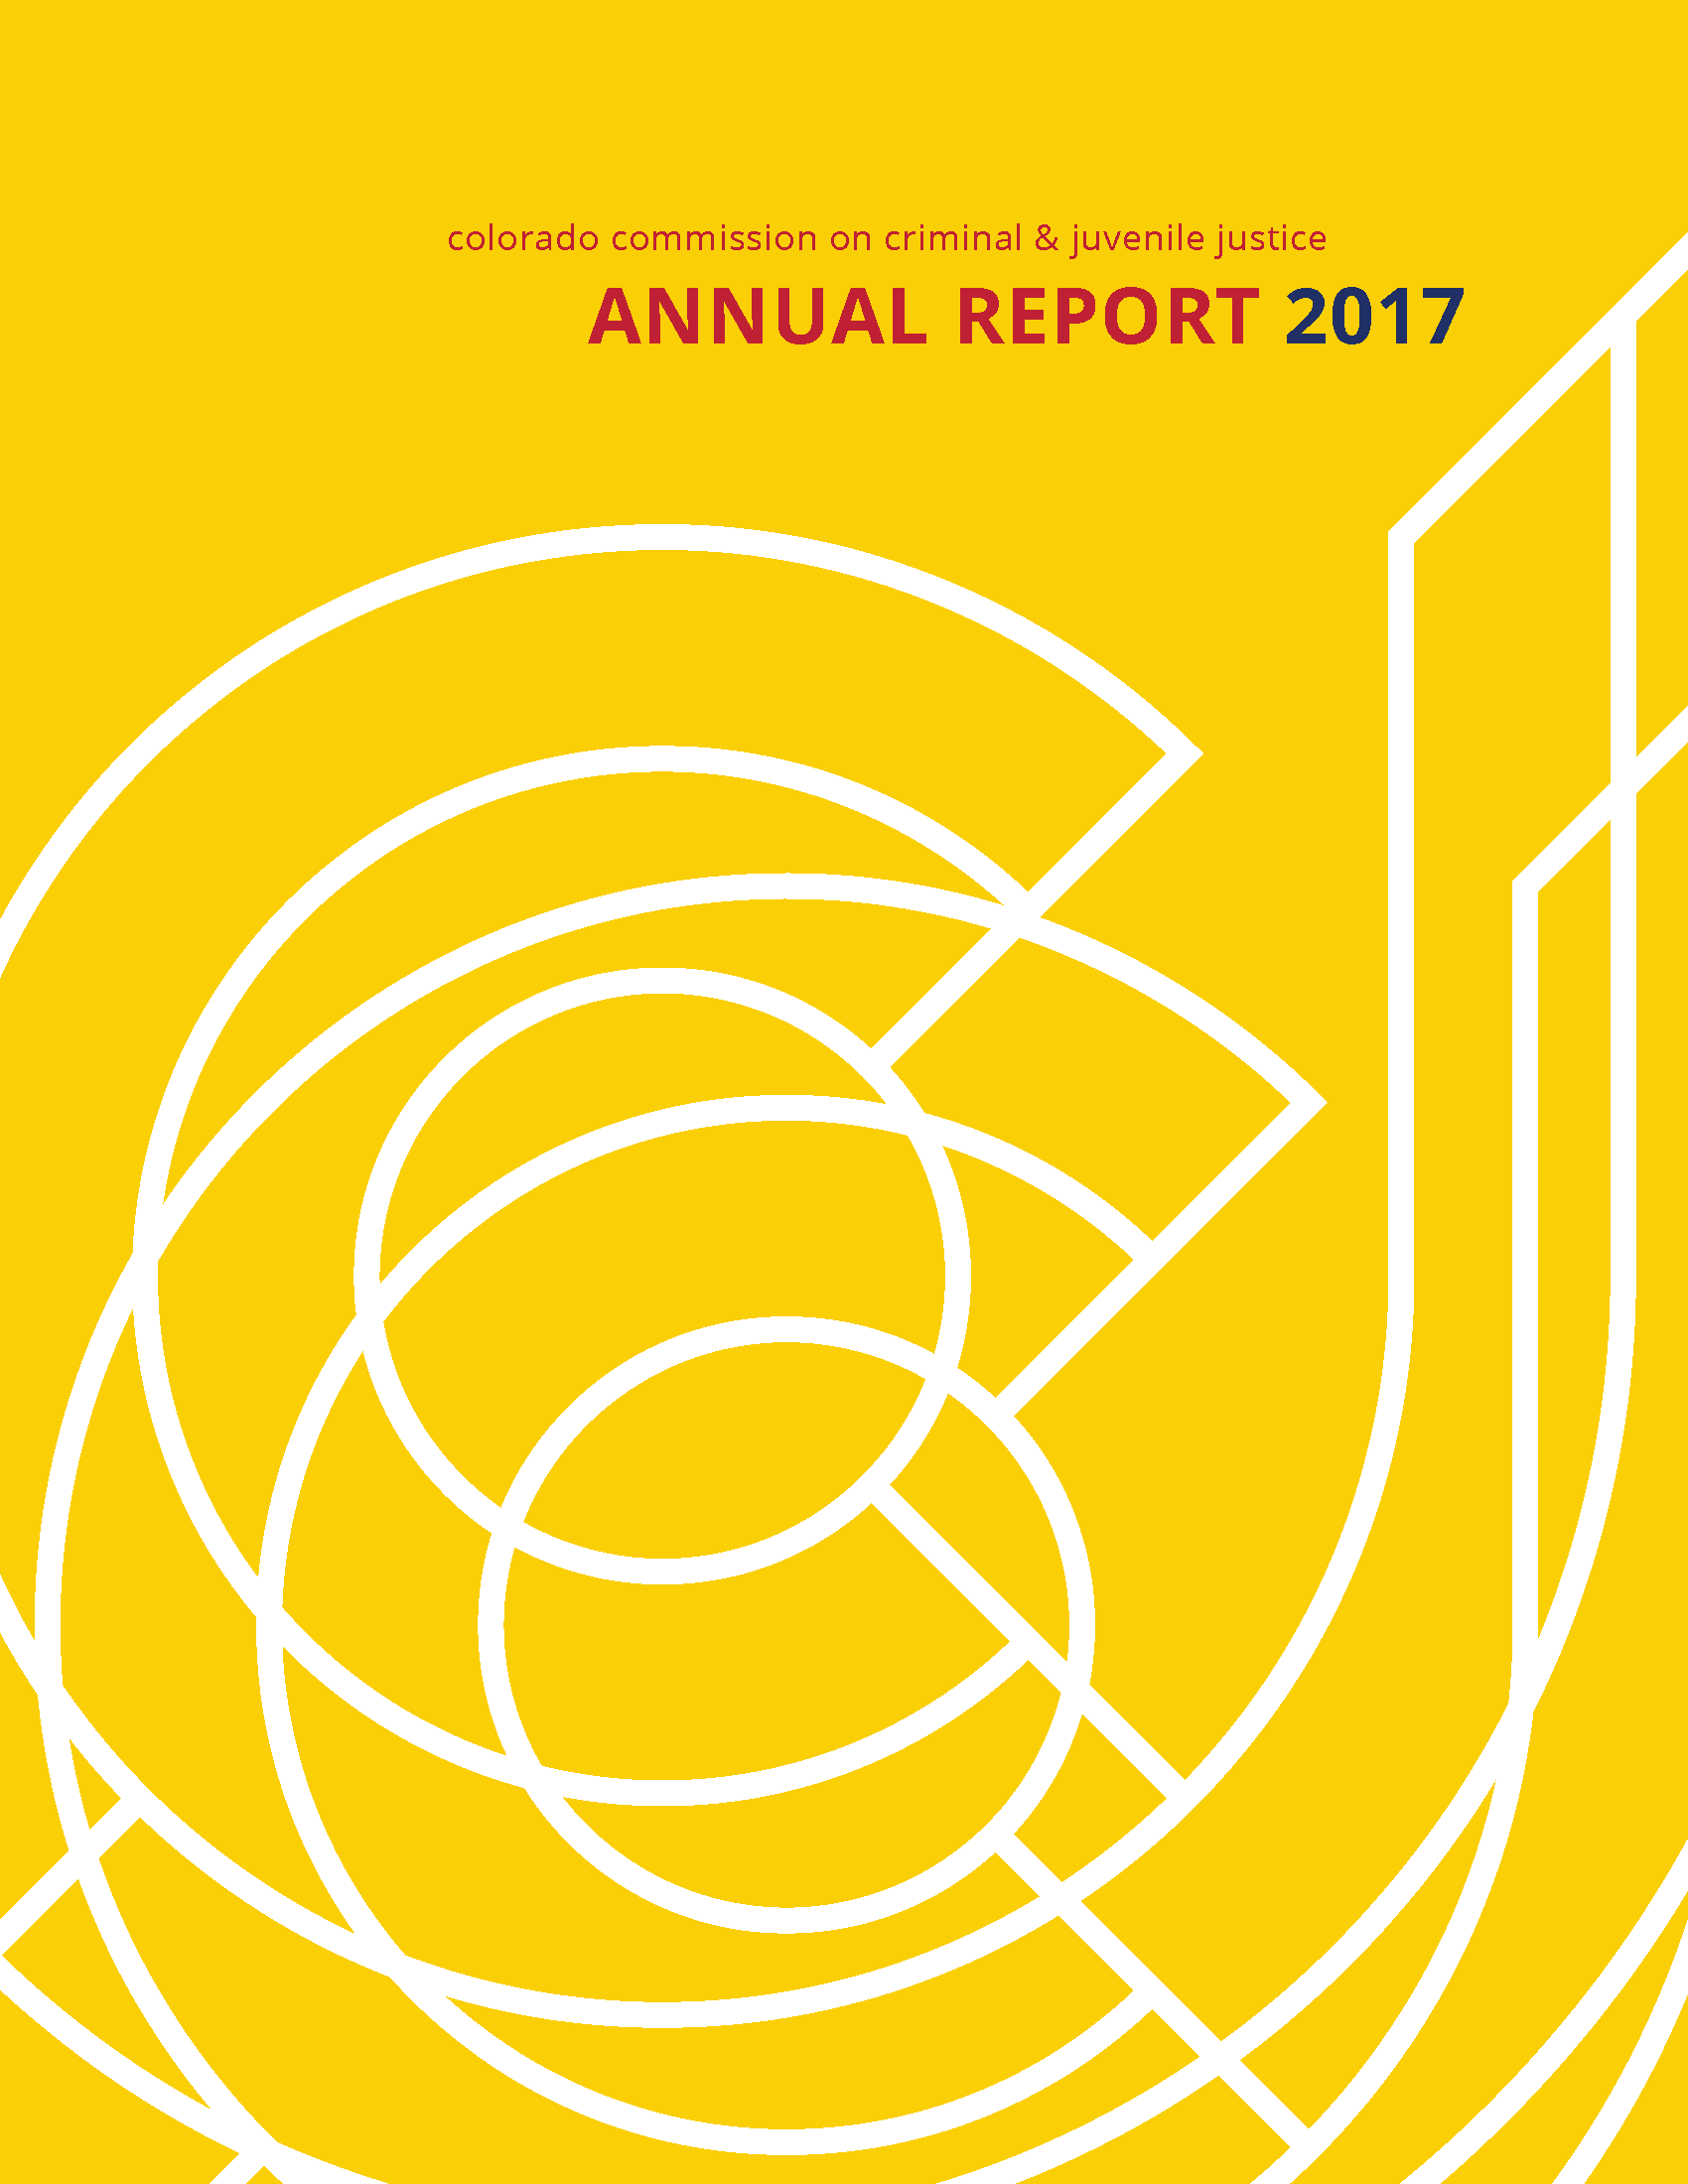 Colorado Commission on Criminal and Juvenile Justice: FY 2017 Annual Report (December 2017)